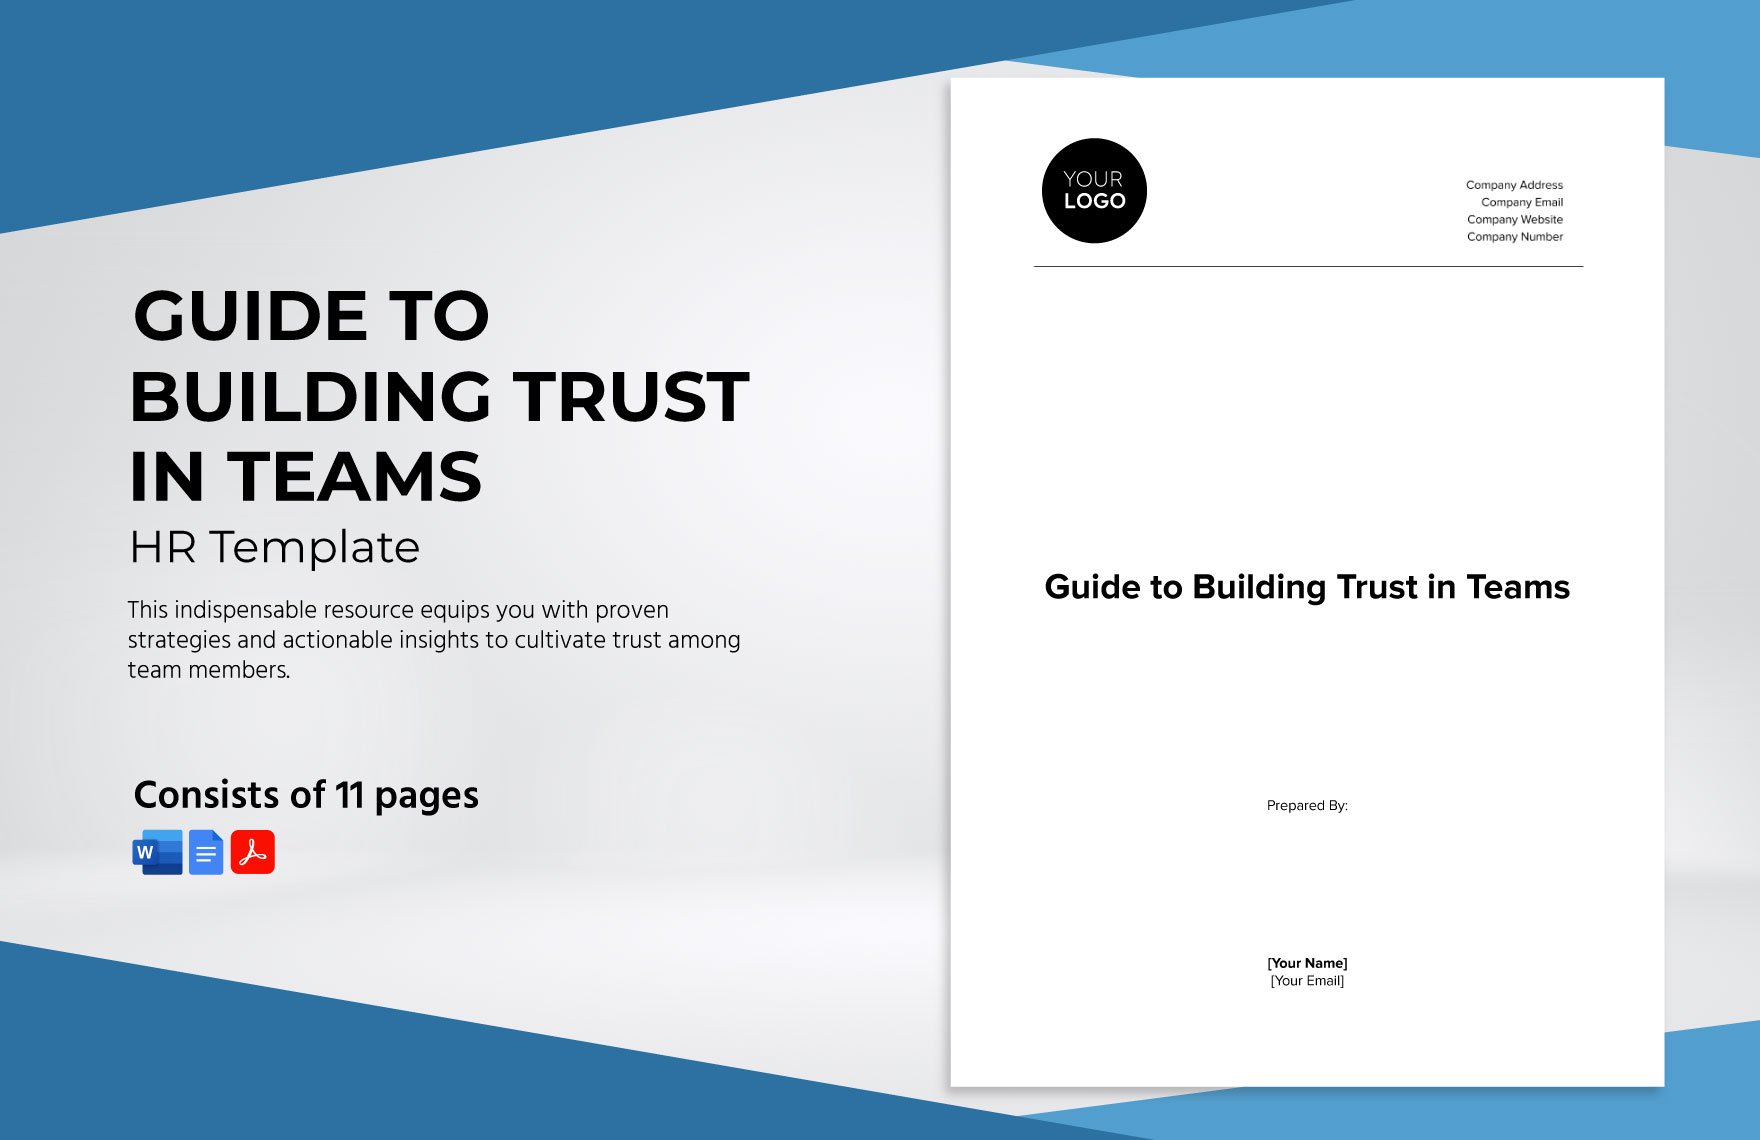 Guide to Building Trust in Teams HR Template